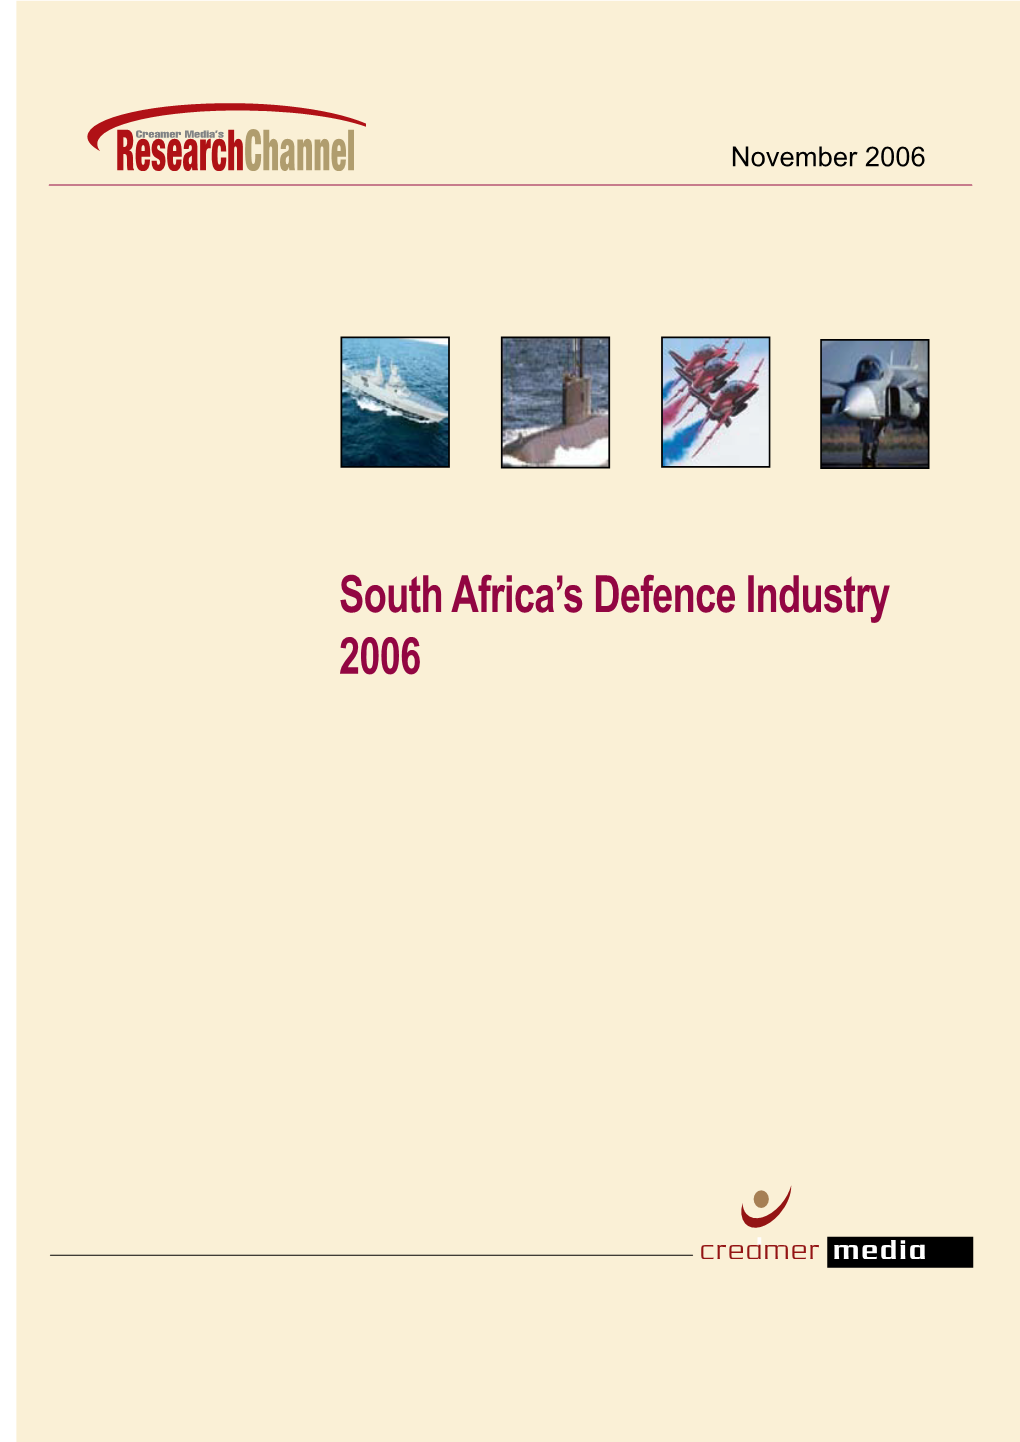 South Africa's Defence Industry 2006